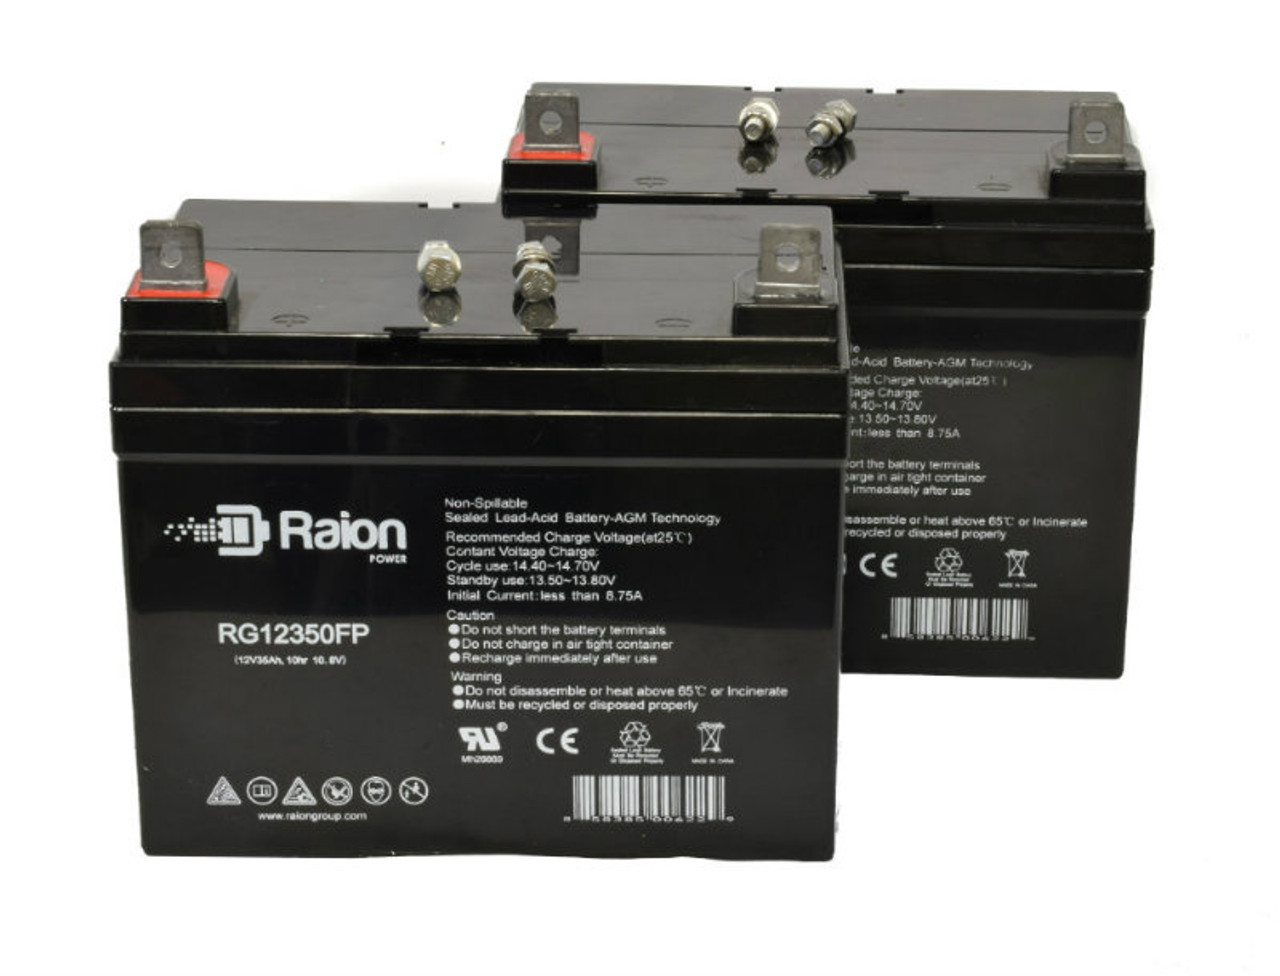 Raion Power Replacement 12V 35Ah Group U1 Battery for Golden Technologies Companion GC422 - 2 Pack